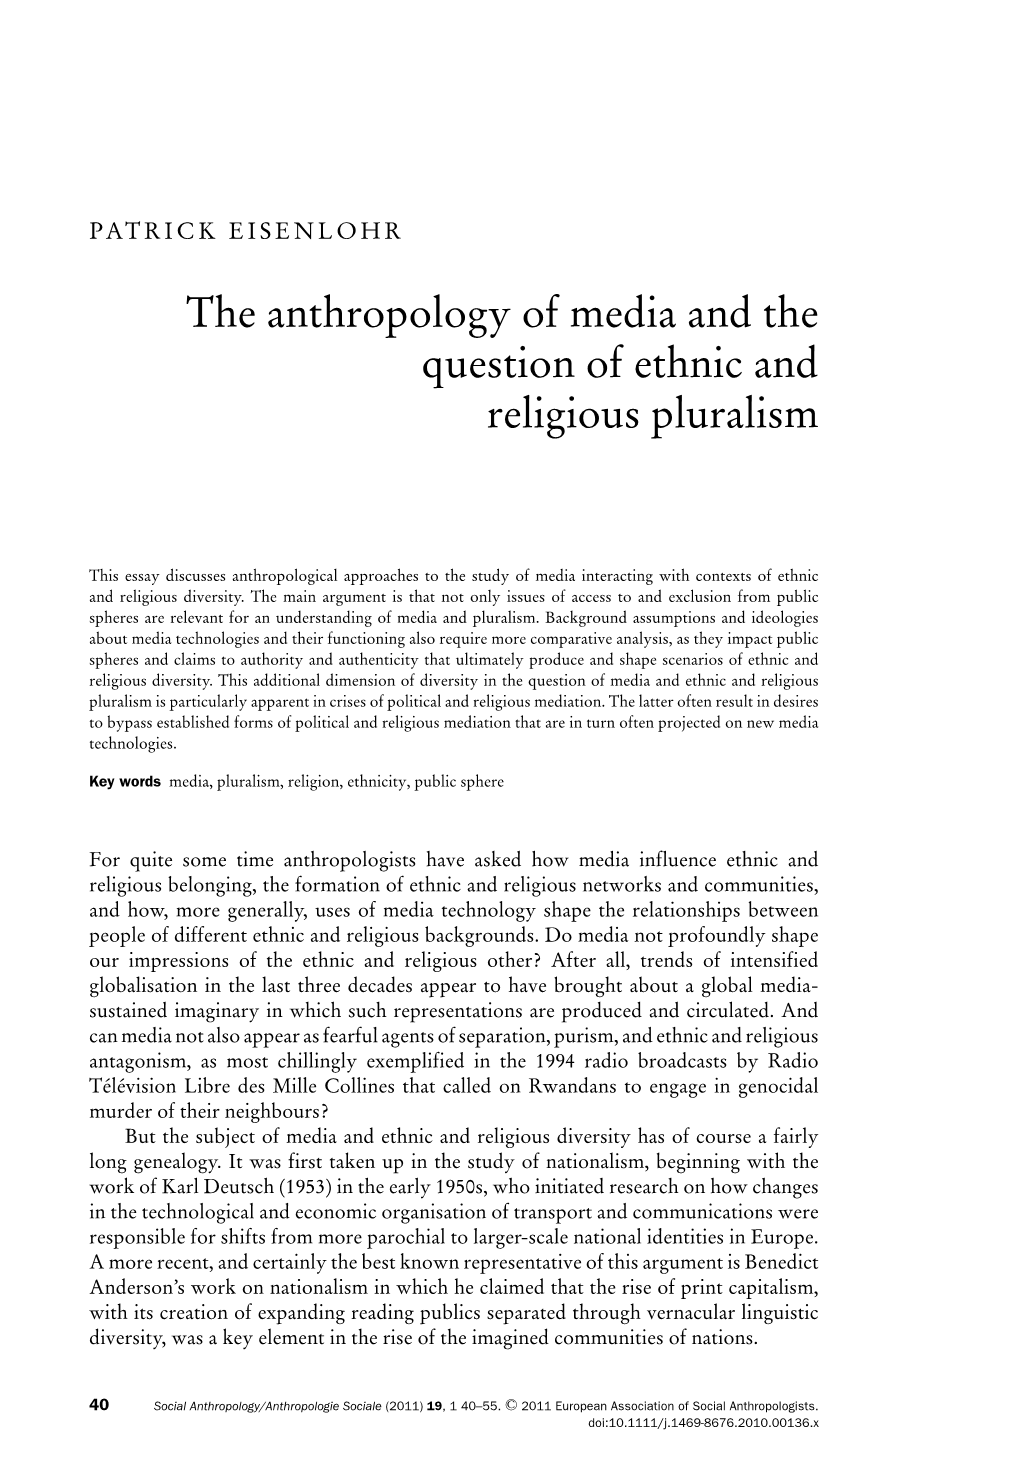 The Anthropology of Media and the Question of Ethnic and Religious Pluralism